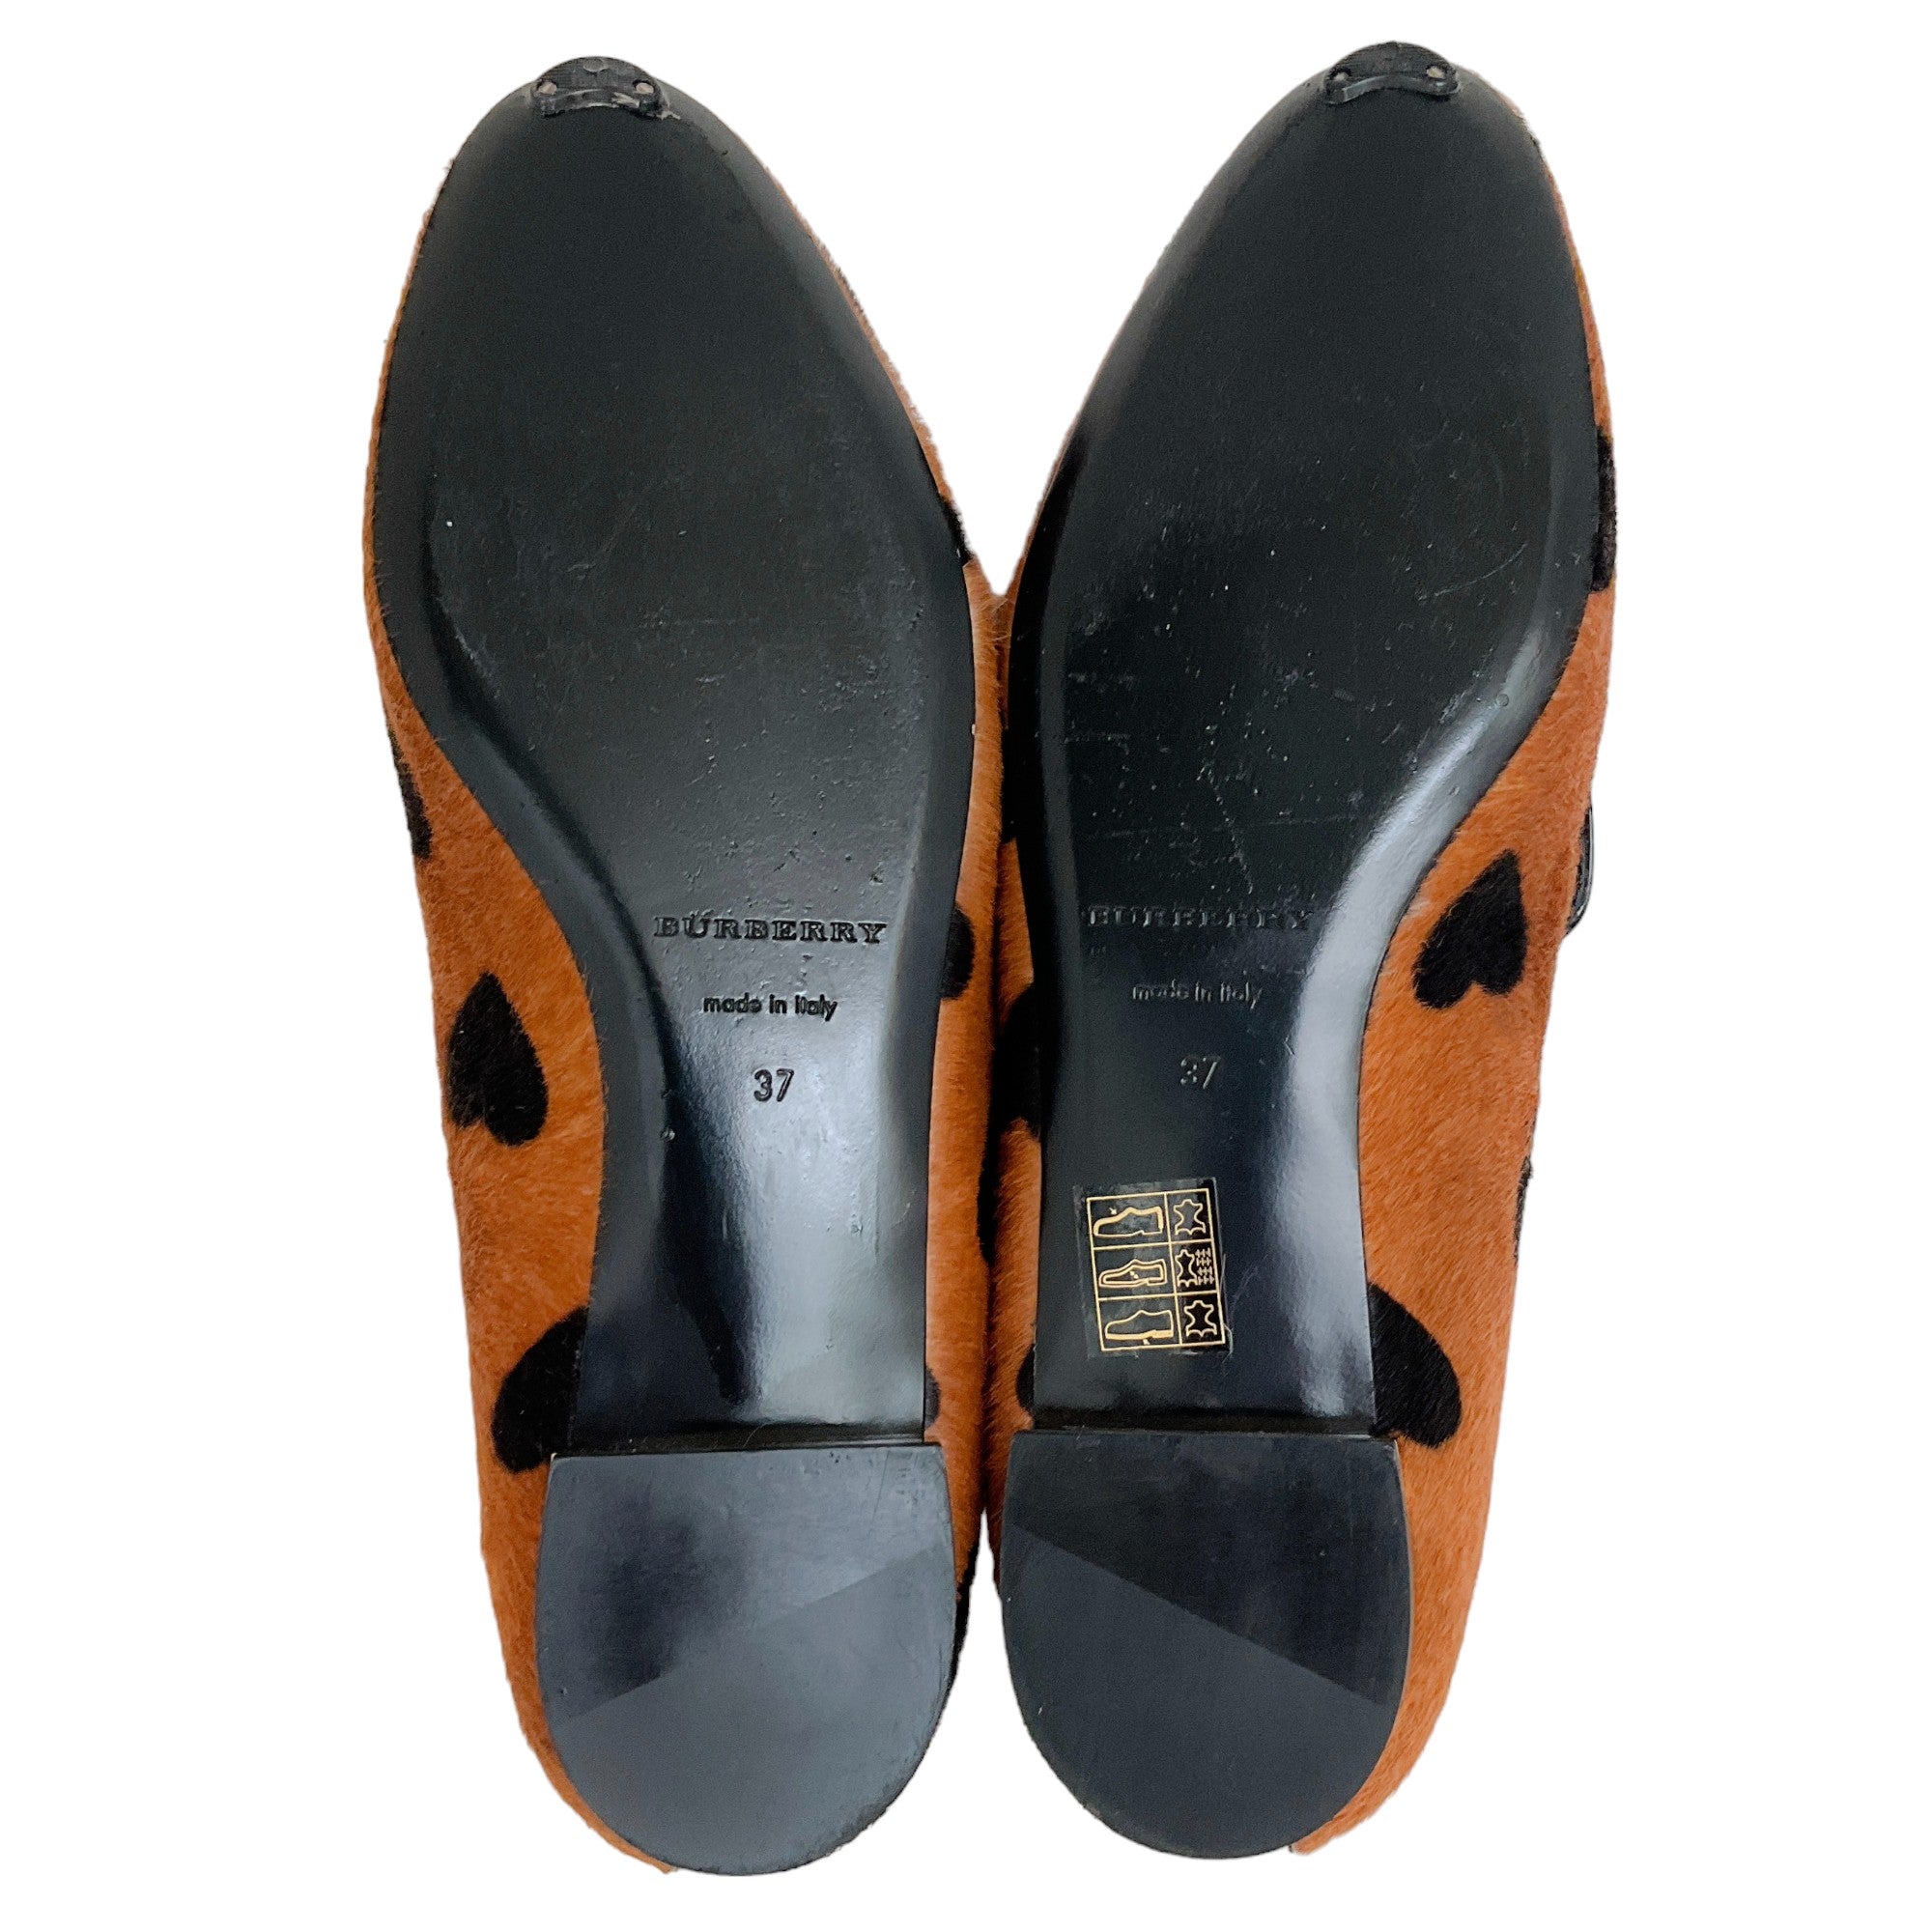 Burberry Prorsum Brown Pony Flats with Black Hearts